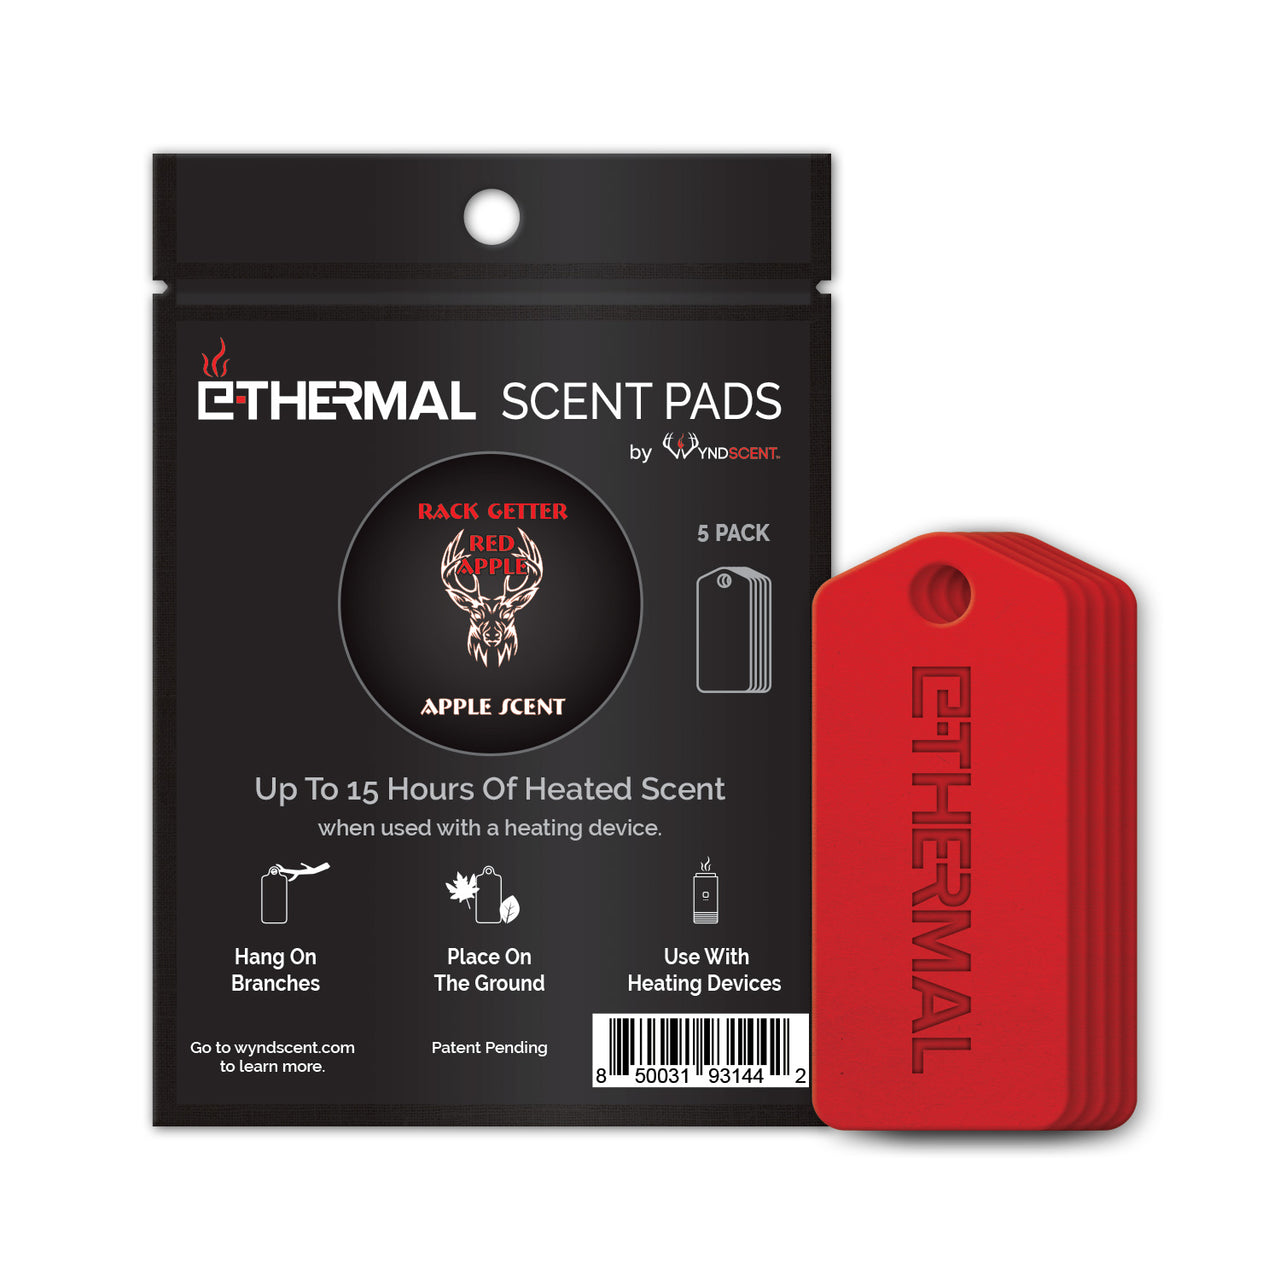 E-Thermal Scent Pad Rack Getter Red Apple - 5 Pack